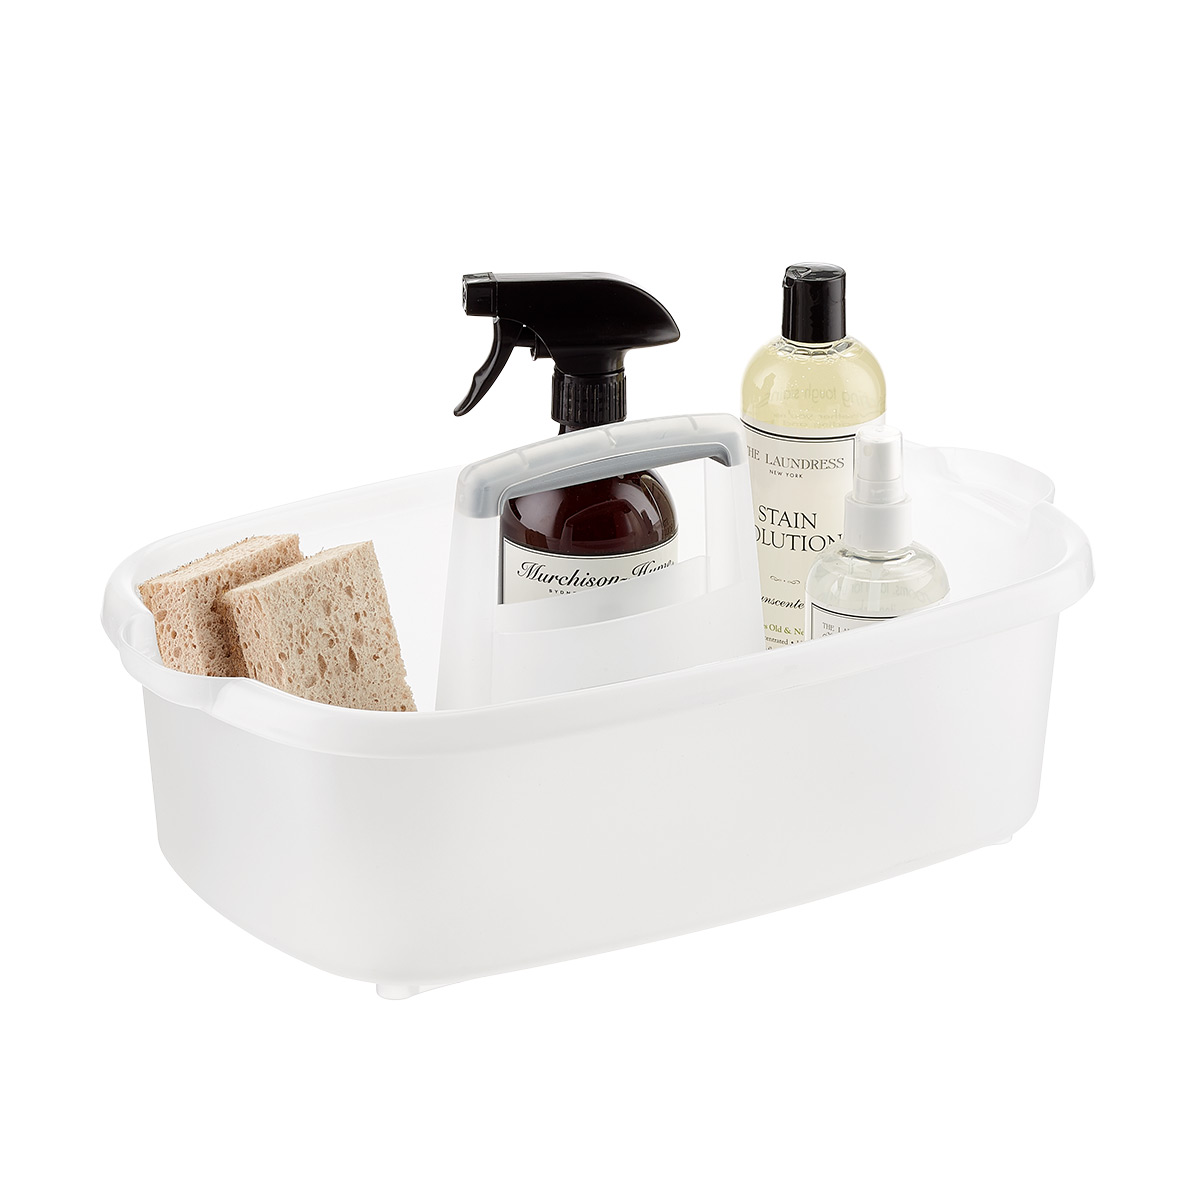 https://www.containerstore.com/catalogimages/364922/10078054-casabella-4-gallon-cleaning.jpg